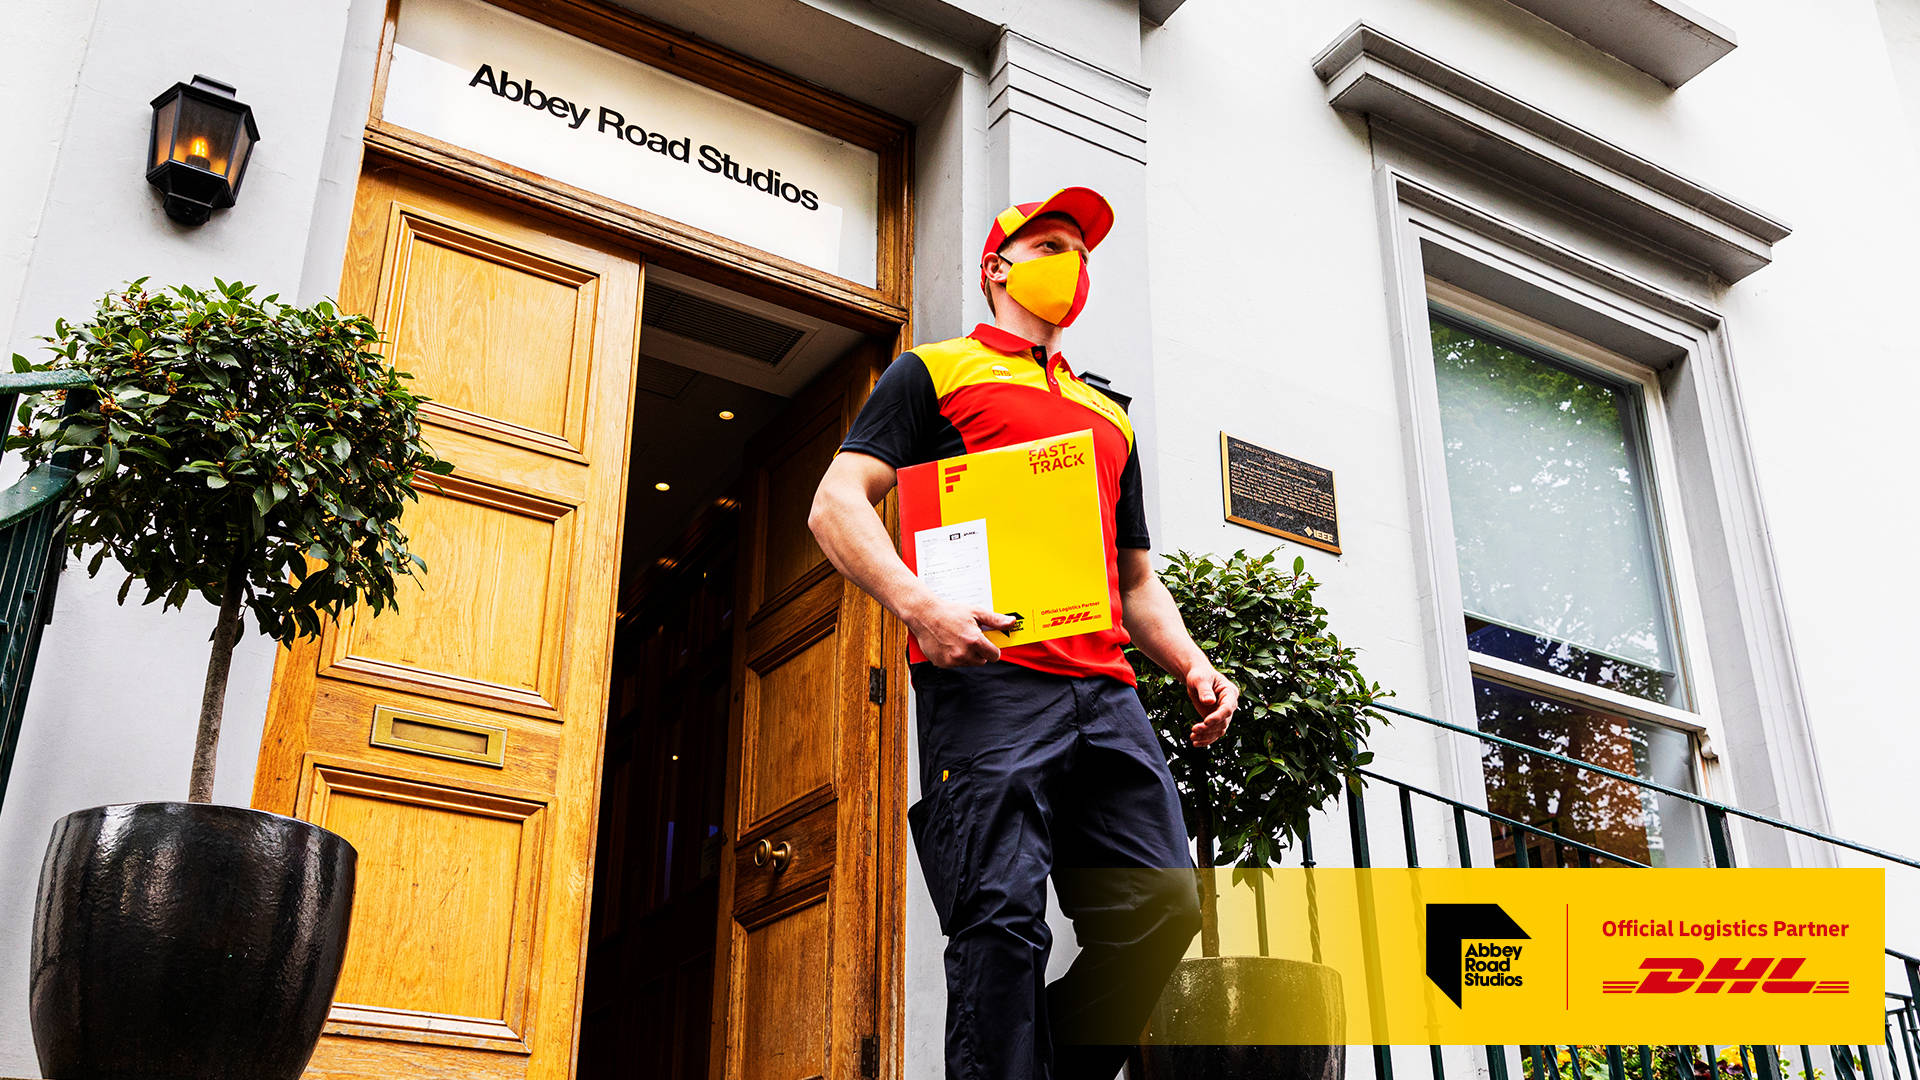 Dedicated Dhl Courier In Action Background